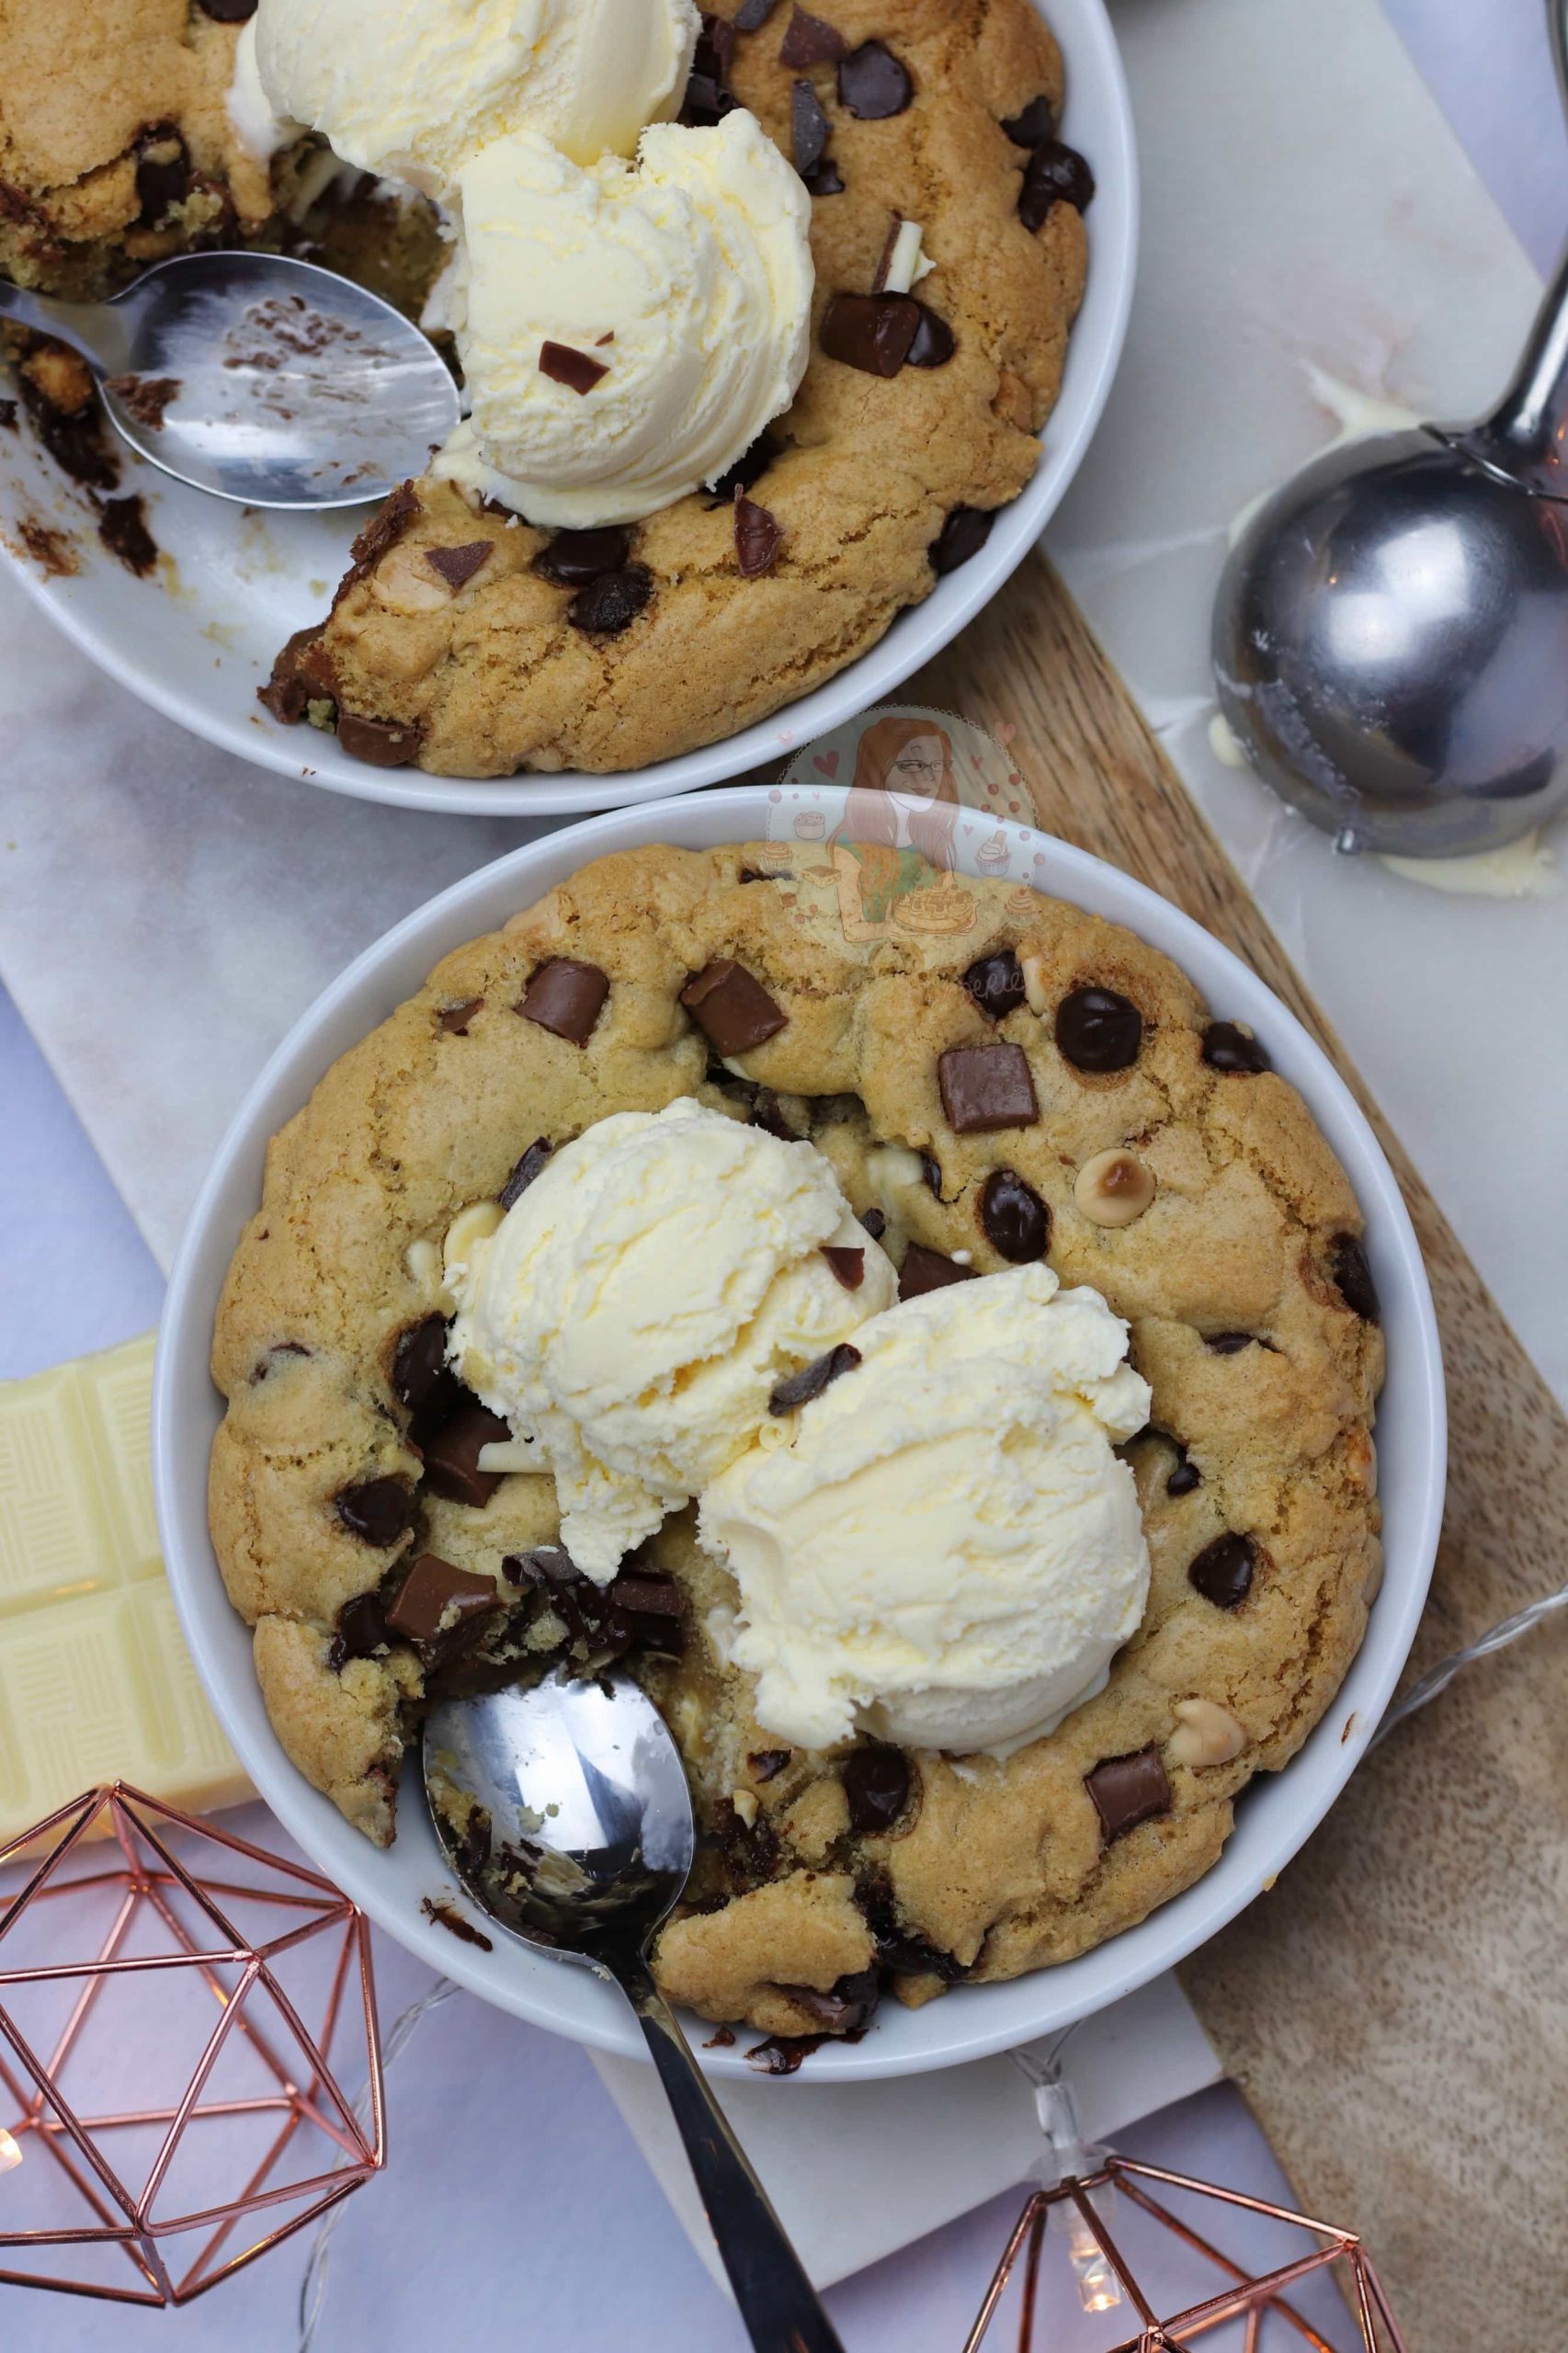 Cookie Dough Desserts Lovely Individual Chocolate Chip Cookie Dough Desserts Jane S